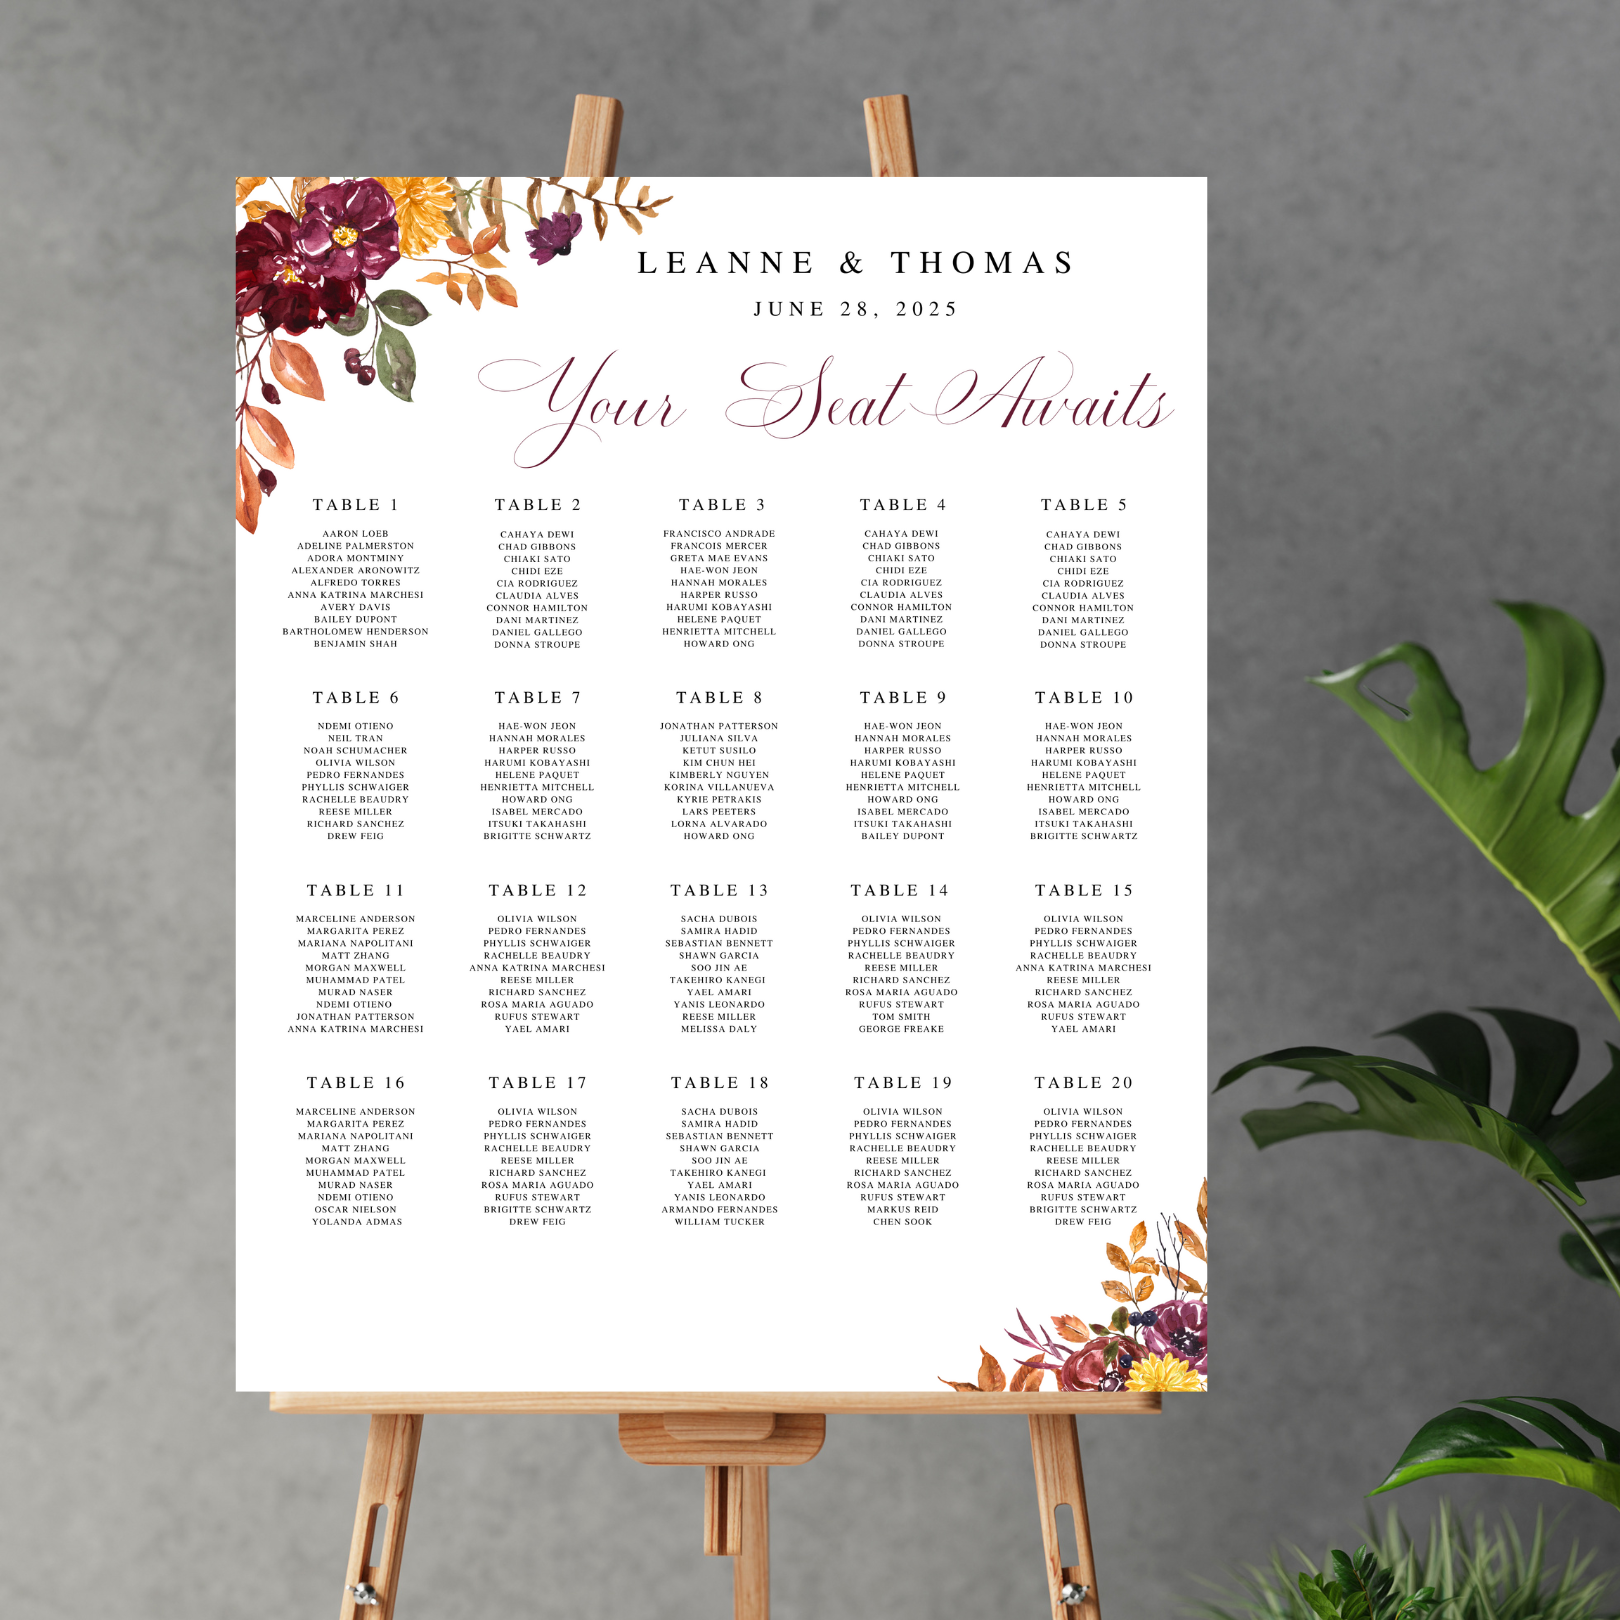 A seating chart sits on a wooden easel against a grey background with a monstera plant leaning in on the bottom right hand side of the image. The seating chart has a floral burst in the top left hand and bottom right hand corners and a list of tables in the middle. On the top, the chart reads "Leanne & Thomas...June 28, 2025... Your seat awaits".